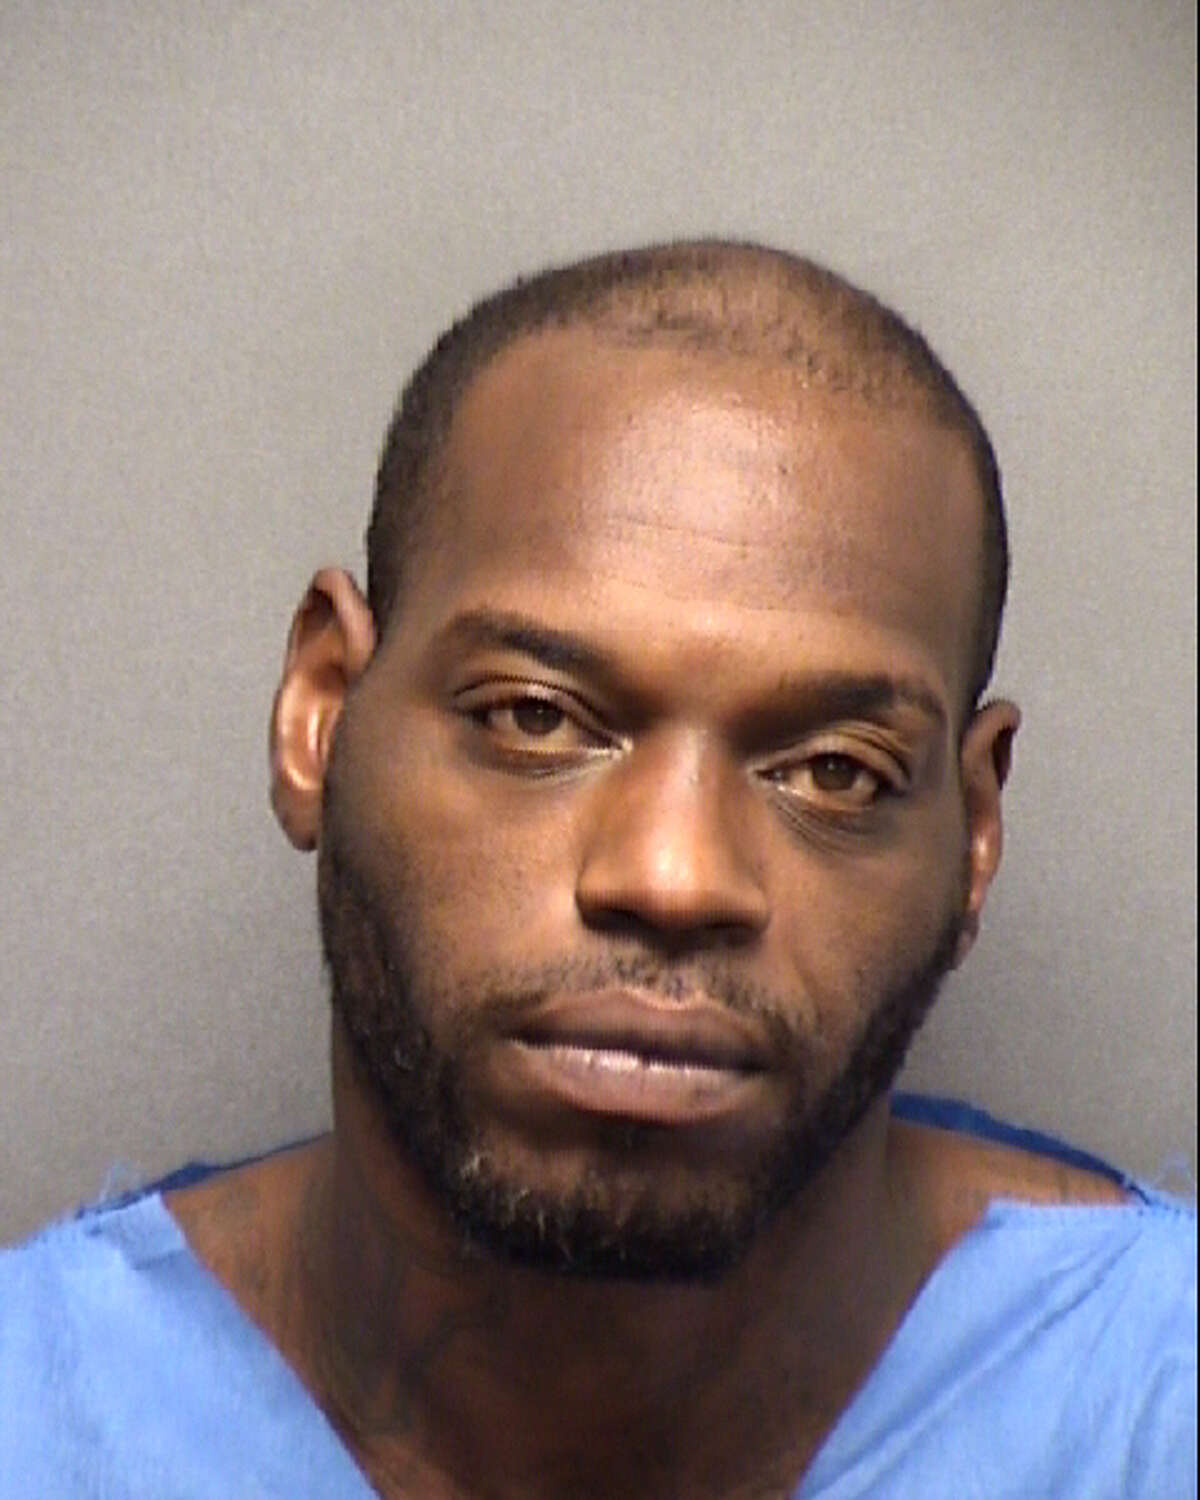 Donald Hamilton, 40, was charged with aggravated sexual assault after sexually assaulting a 12-year-old girl at knifepoint, an arrest affidavit said.